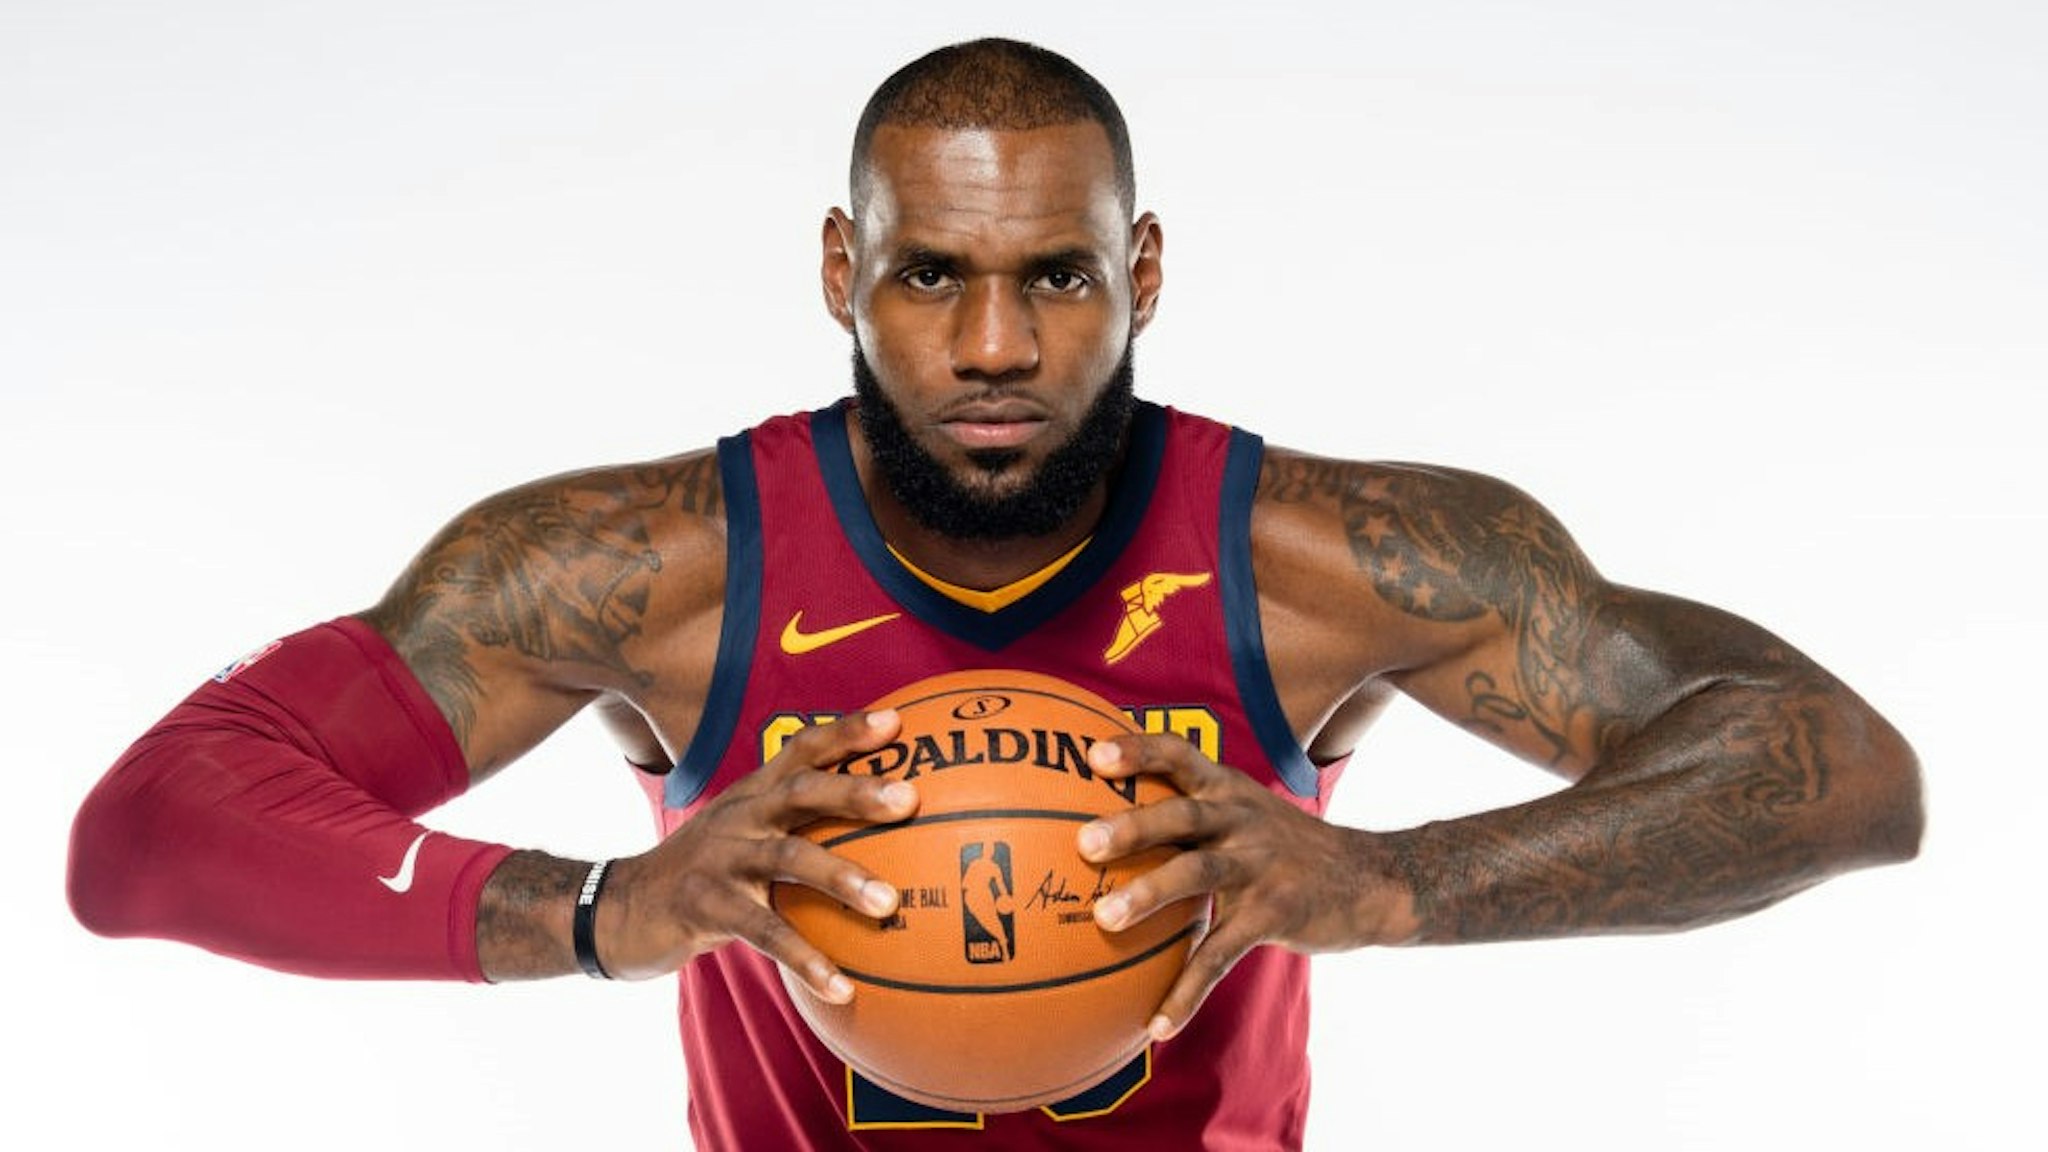 LeBron James #23 of the Cleveland Cavaliers poses during media day at Cleveland Clinic Courts on September 25, 2017 in Independence, Ohio. NOTE TO USER: User expressly acknowledges and agrees that, by downloading and/or using this photograph, user is consenting to the terms and conditions of the Getty Images License Agreement. (Photo by